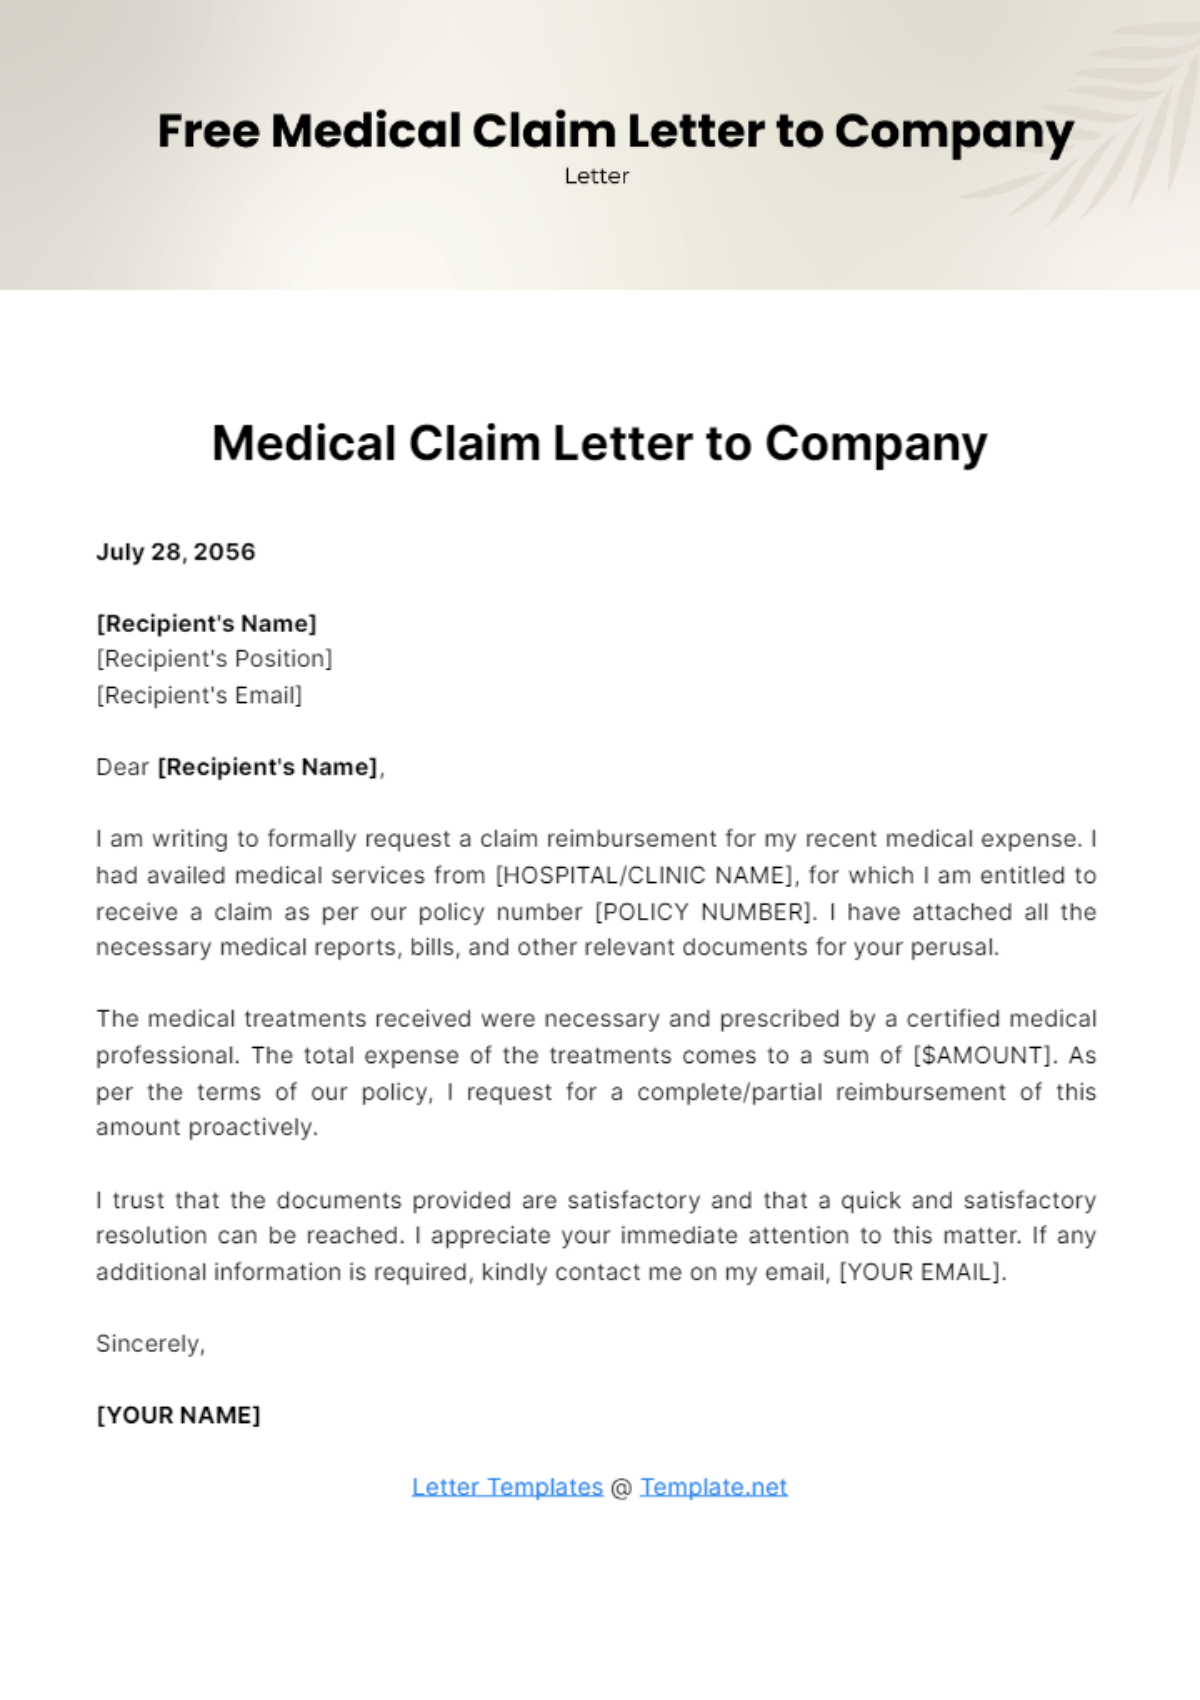 Medical Claim Letter to Company Template